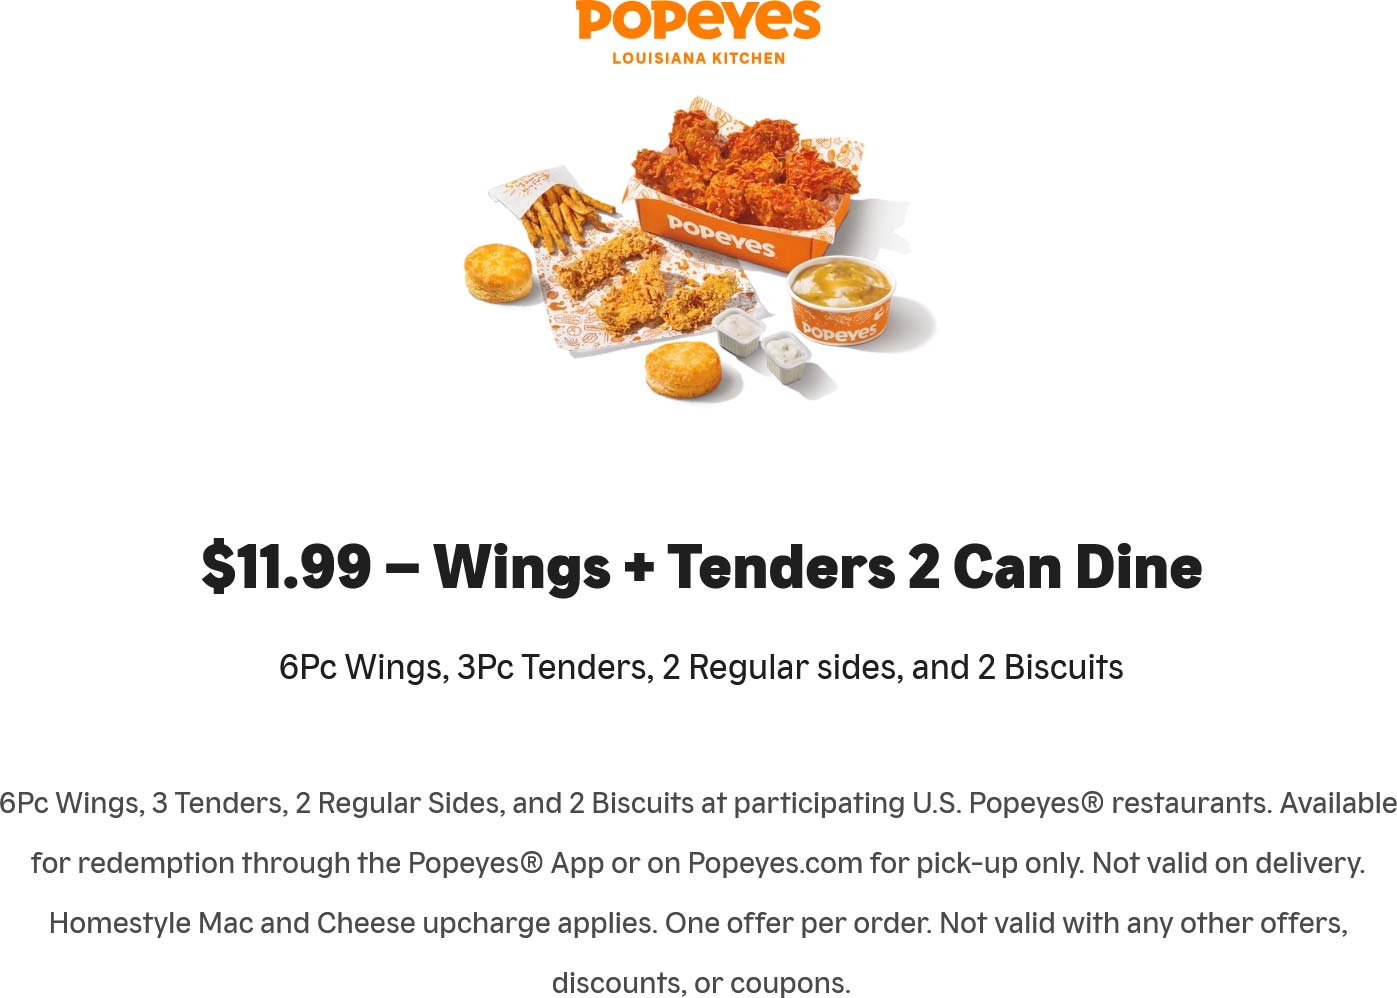 Popeyes restaurants Coupon  6pc chicken wings + 3pc tenders + 2 sides + 2 biscuits = $12 at Popeyes #popeyes 